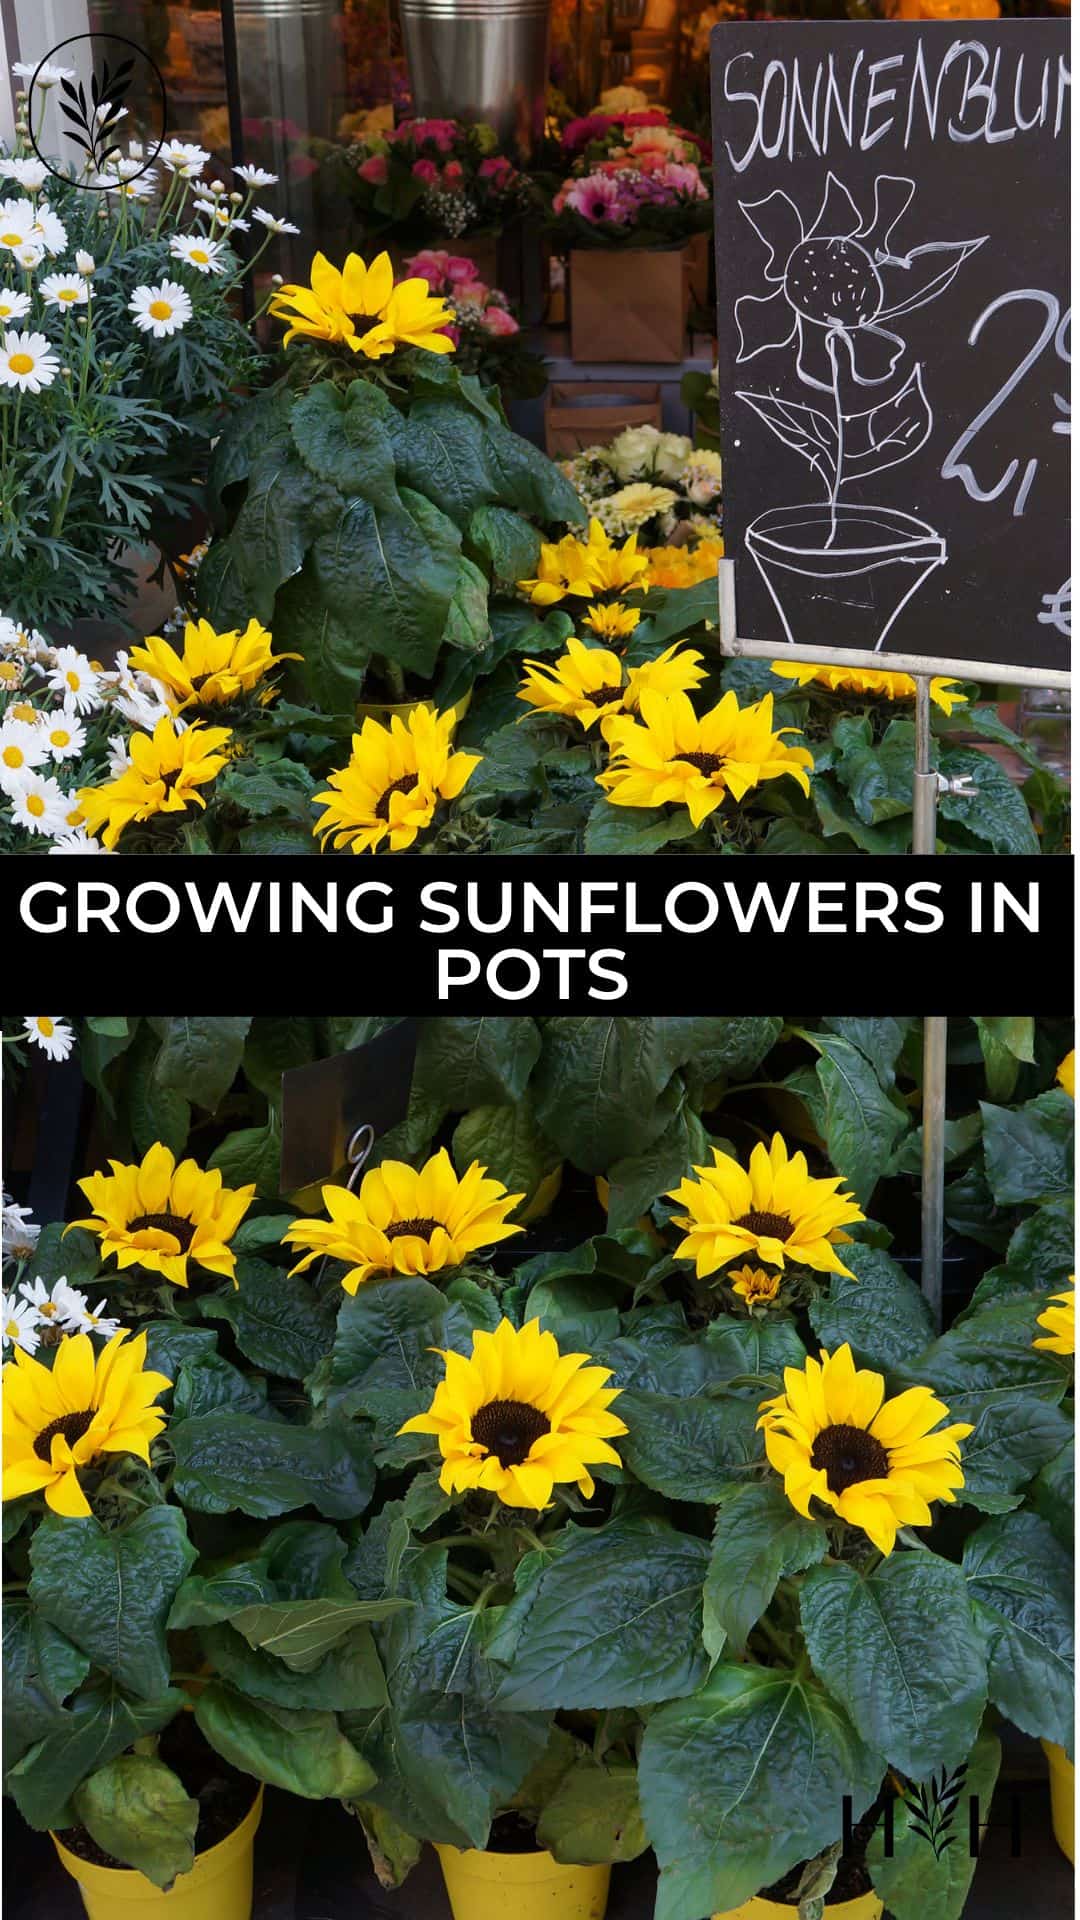 Growing sunflowers in pots via @home4theharvest